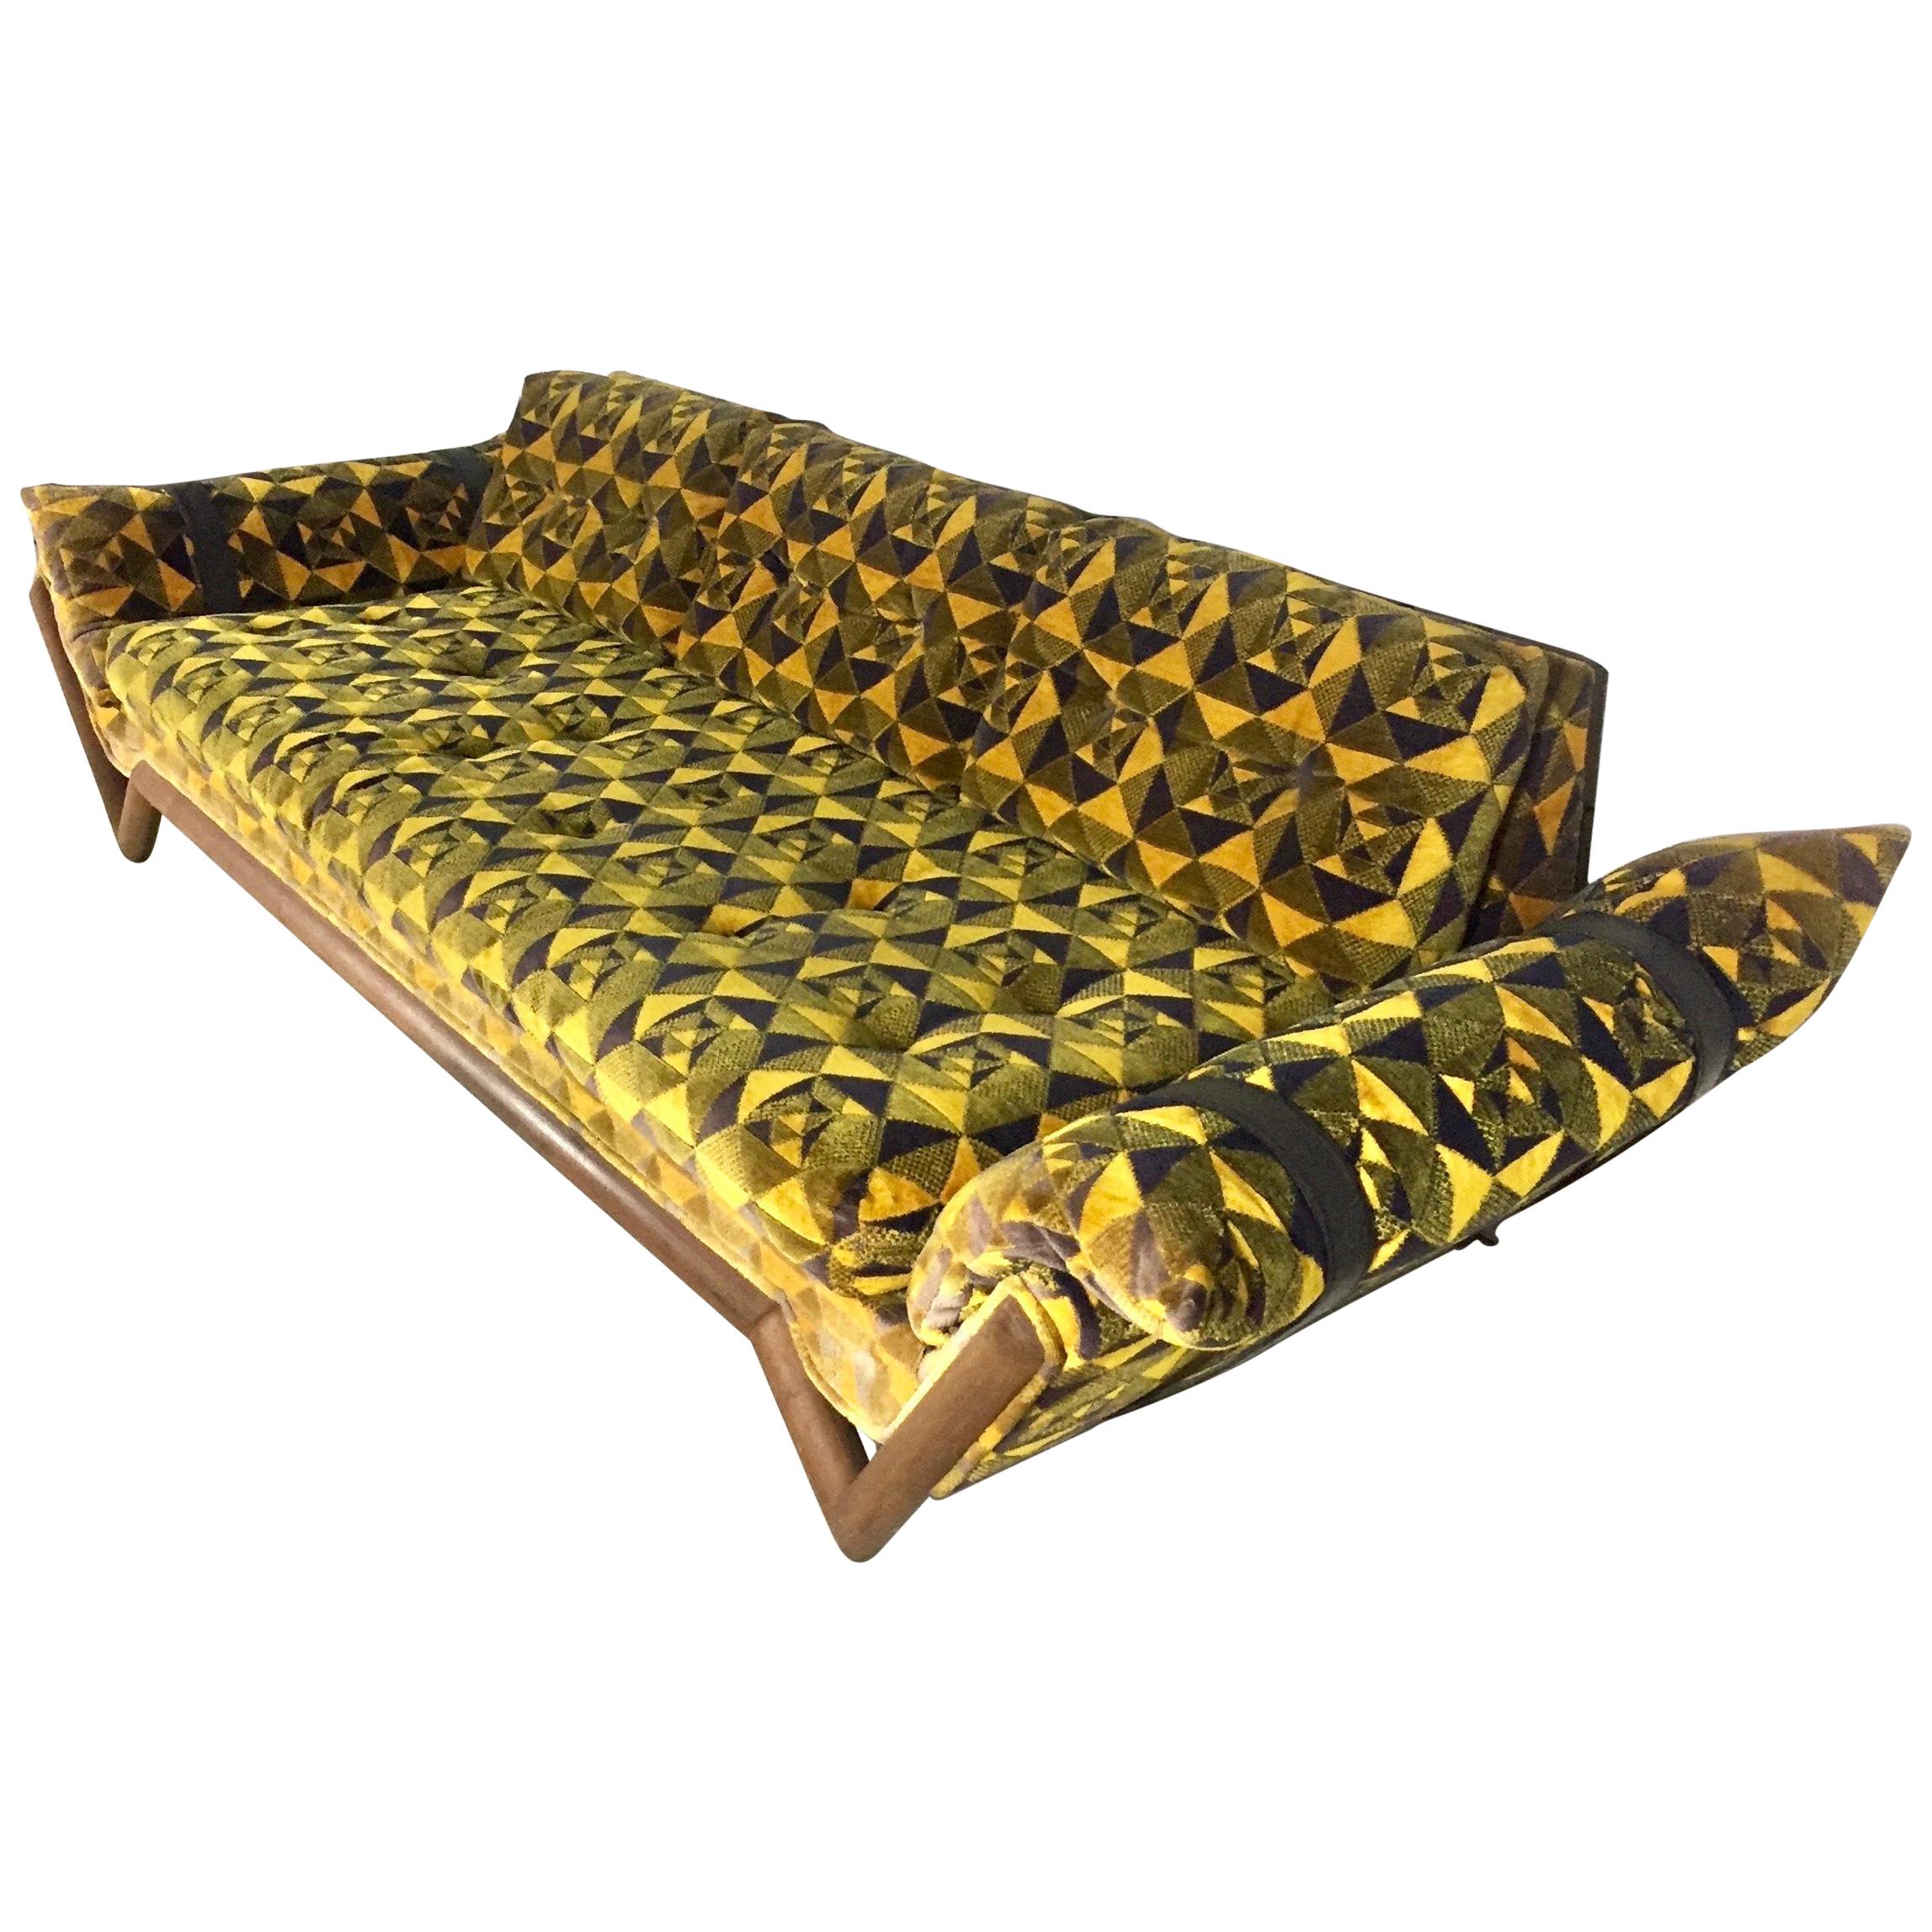 Adrian Pearsall Signed Craft Associates Black and Yellow Midcentury Sofa